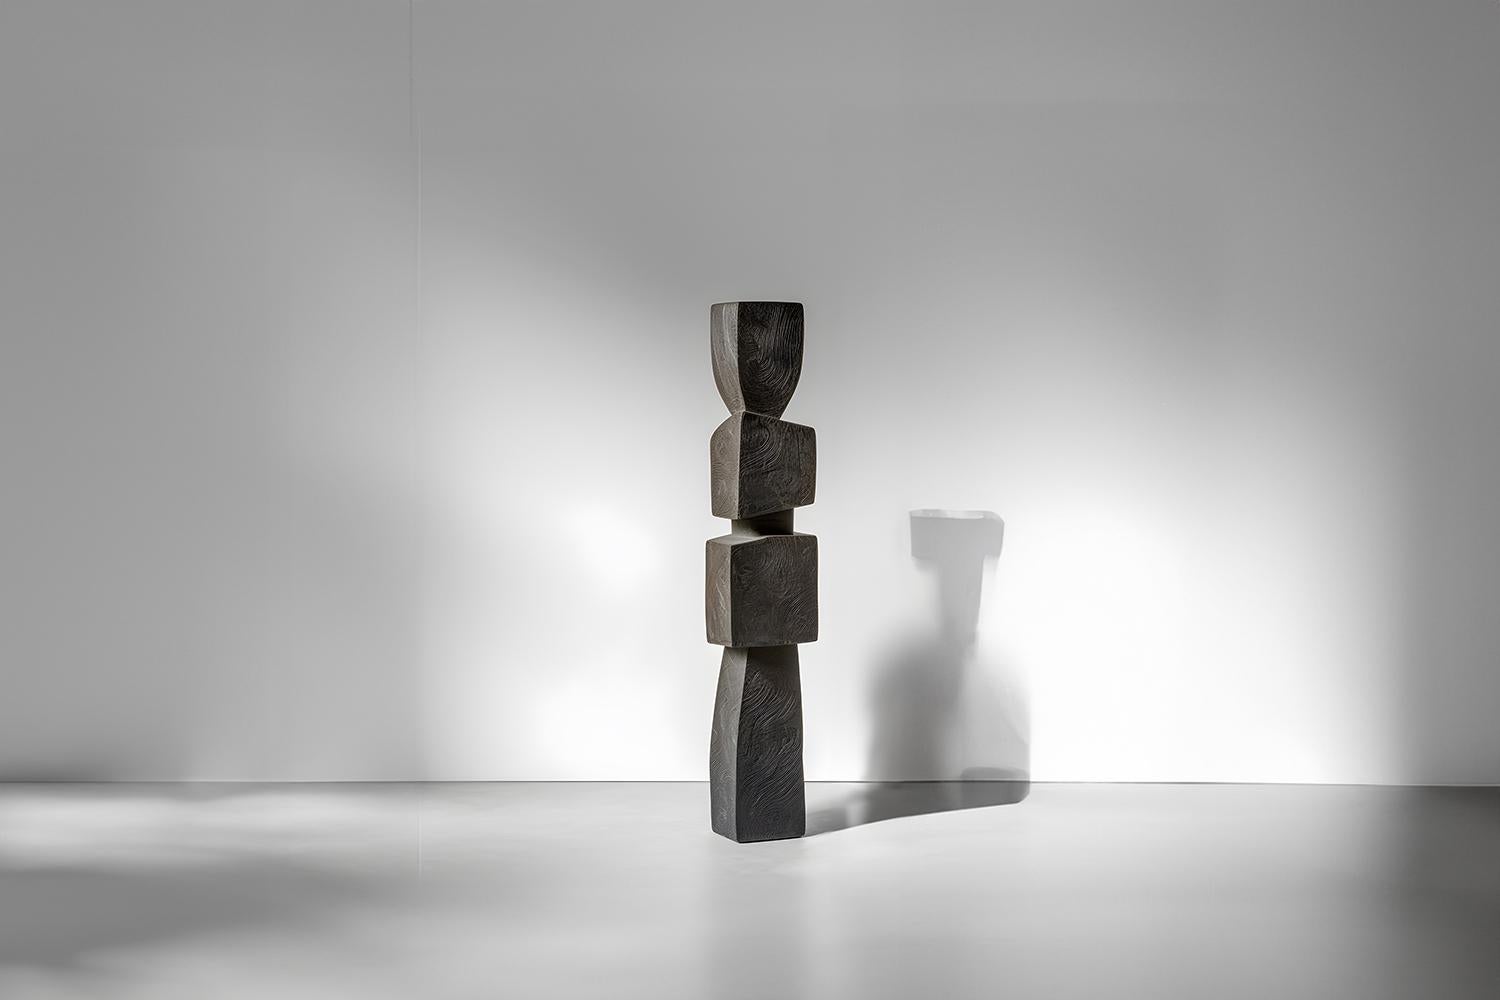 Abstract Modernist Free Form Wooden Sculpture in the style of Jean Arp, Unseen Force 16 by Joel Escalona



This monolithic sculpture, designed by the talented Artist Joel Escalona, is a towering example of beauty in craftsmanship. Hand and digital